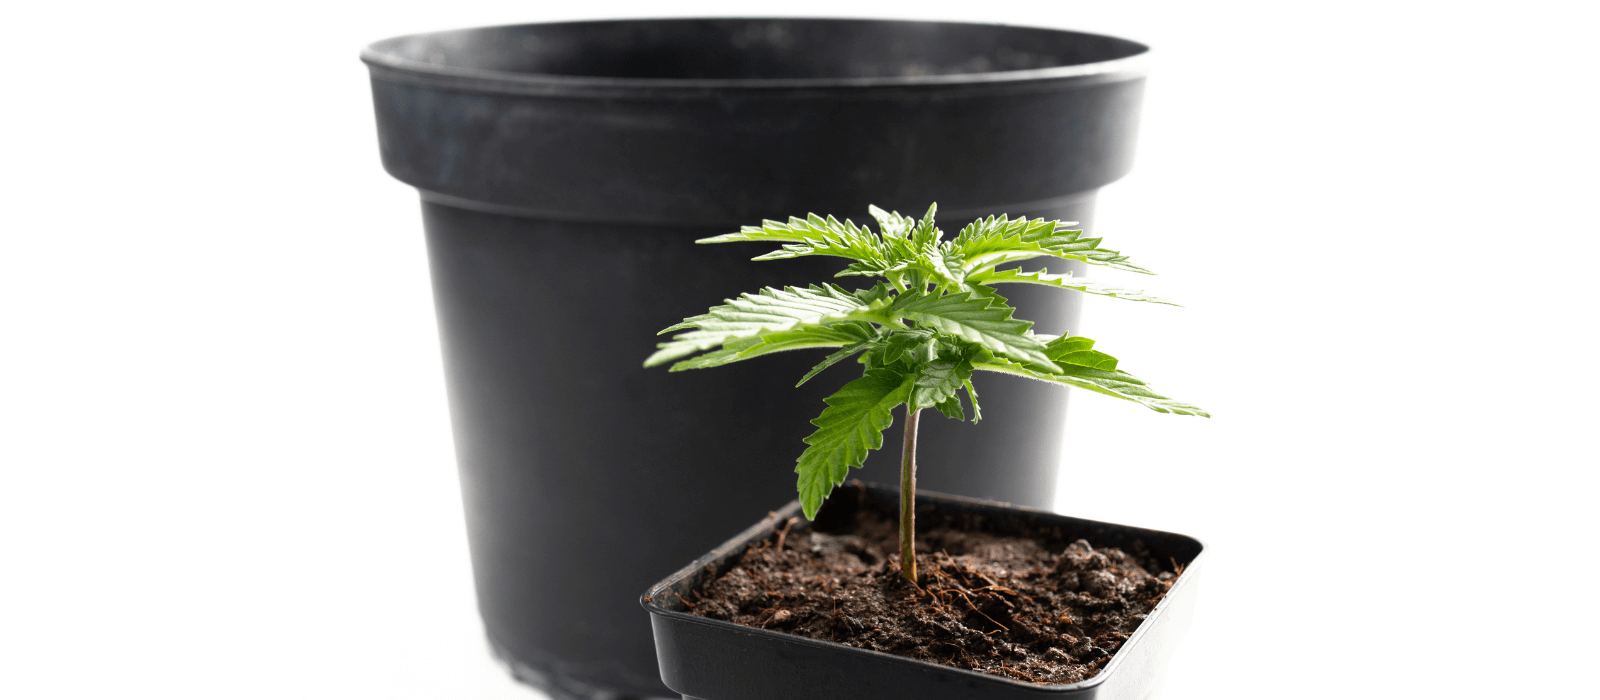 benefits of using larger pots for cannabis growing -